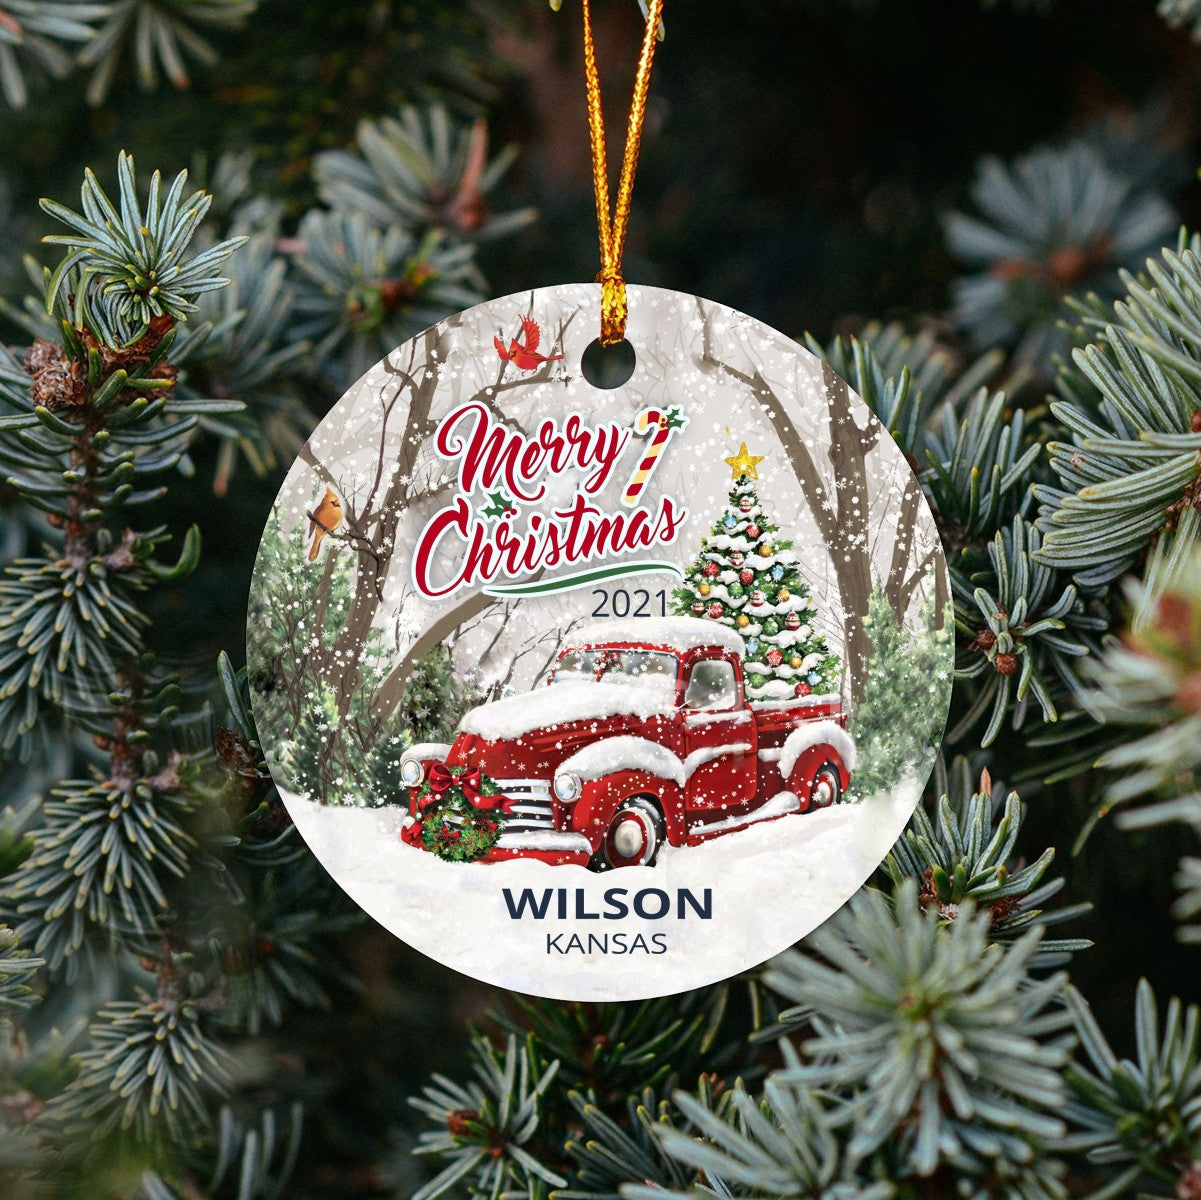 Christmas Tree Ornaments Wilson - Ornament With Name City, State Wilson Kansas KS Ornament - Red Truck Xmas Ornaments 3'' Plastic Gift For Family, Friend And Housewarming